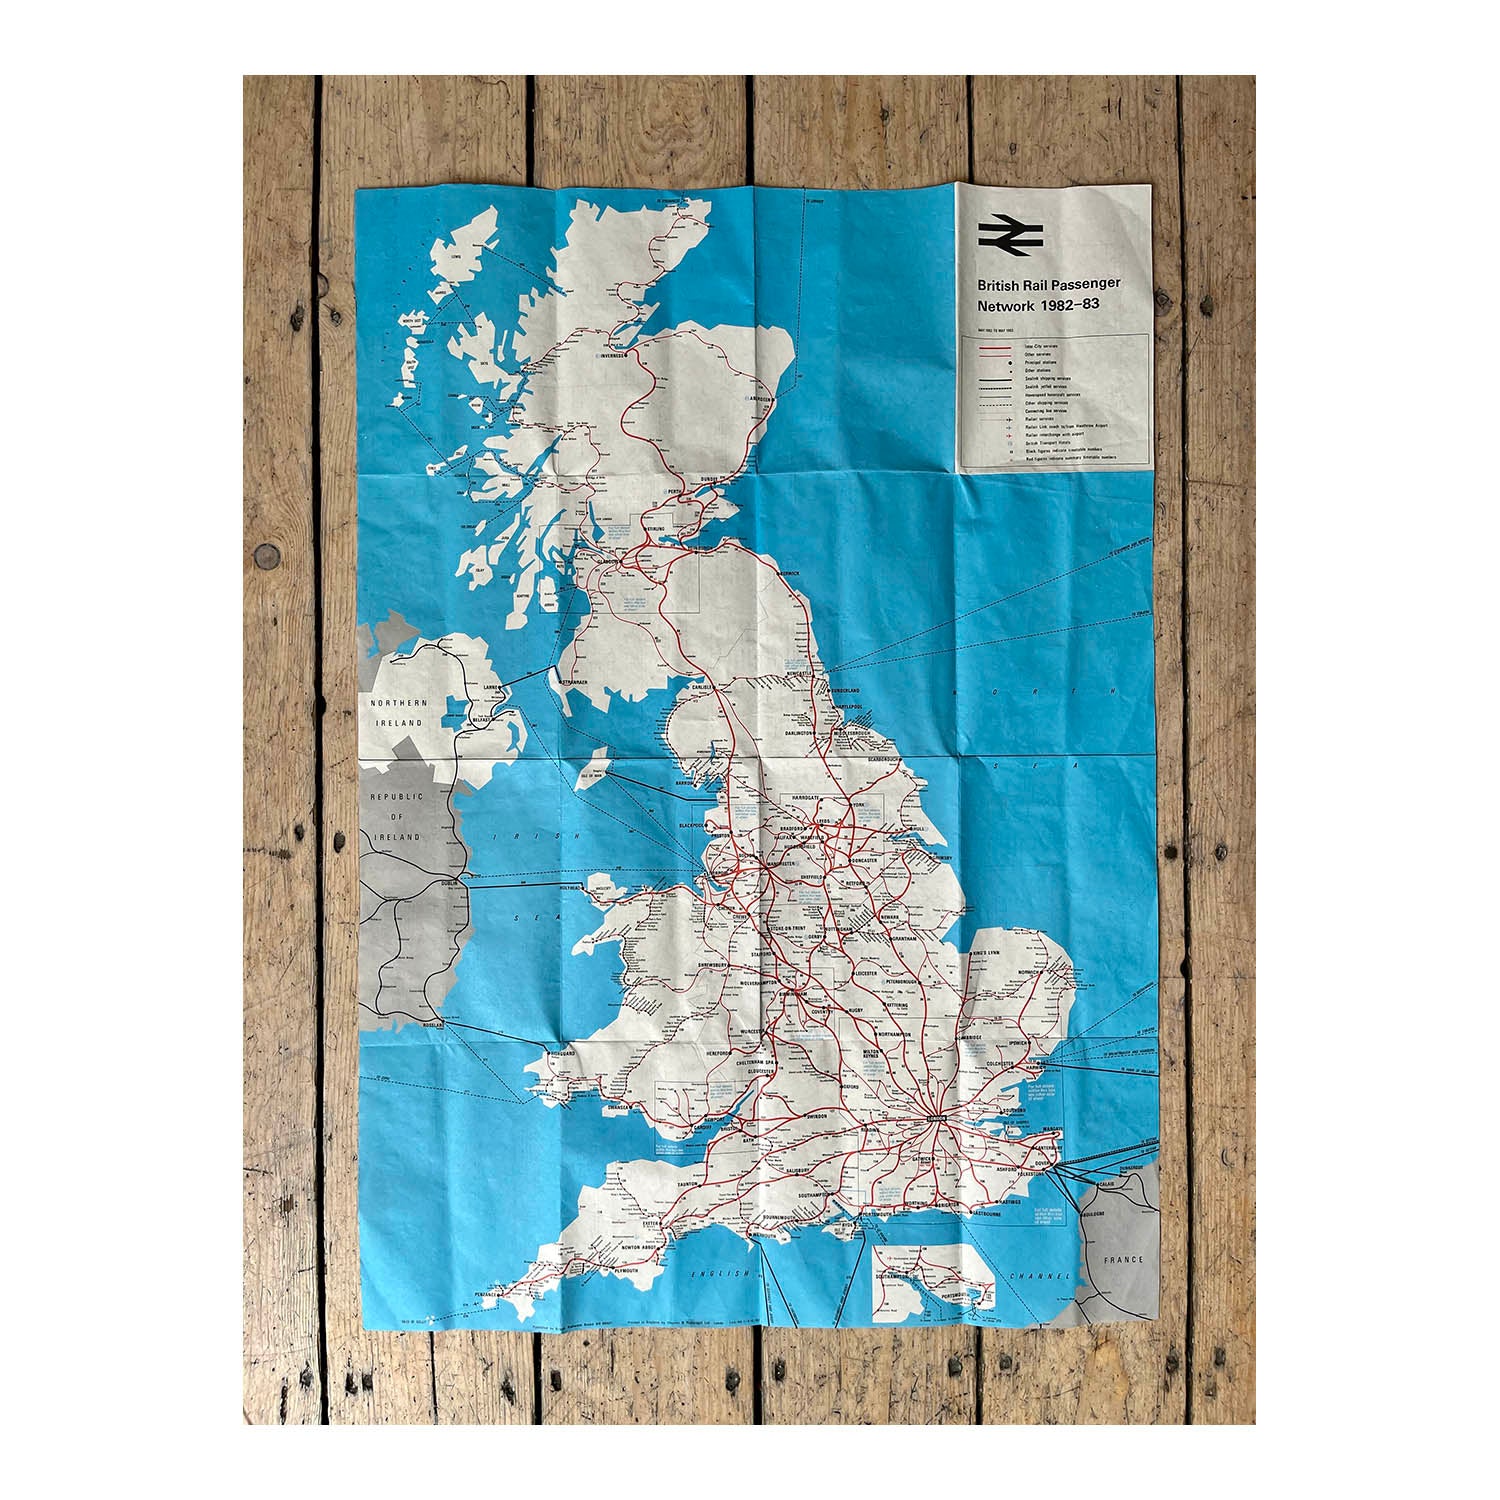 British Rail Passenger Network folding map, 1982. The front shows the principal rail network of the British Isles in geographic format.